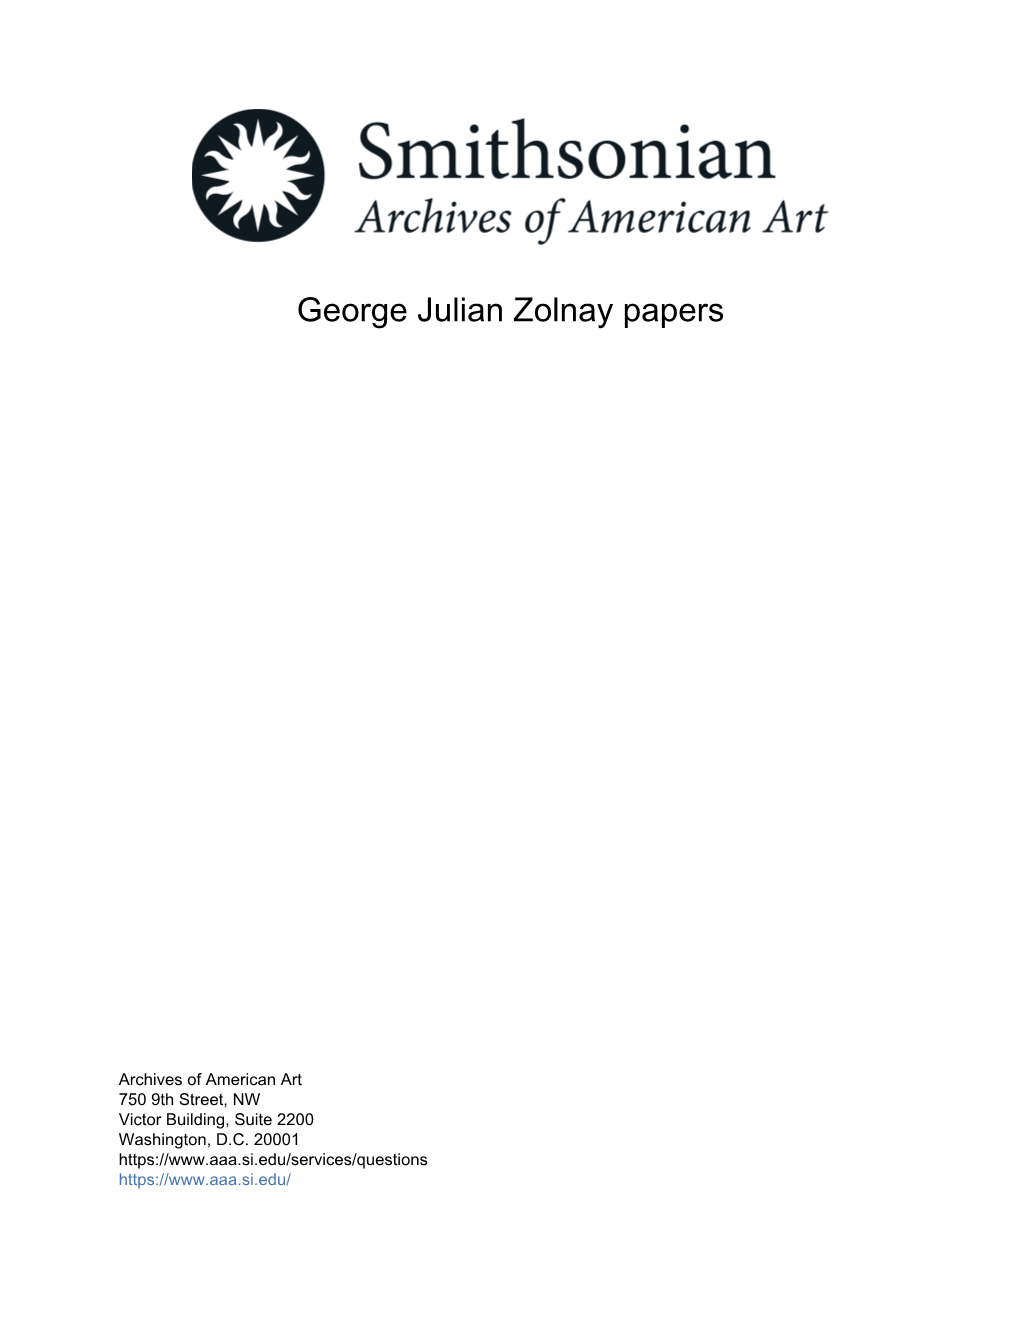 George Julian Zolnay Papers